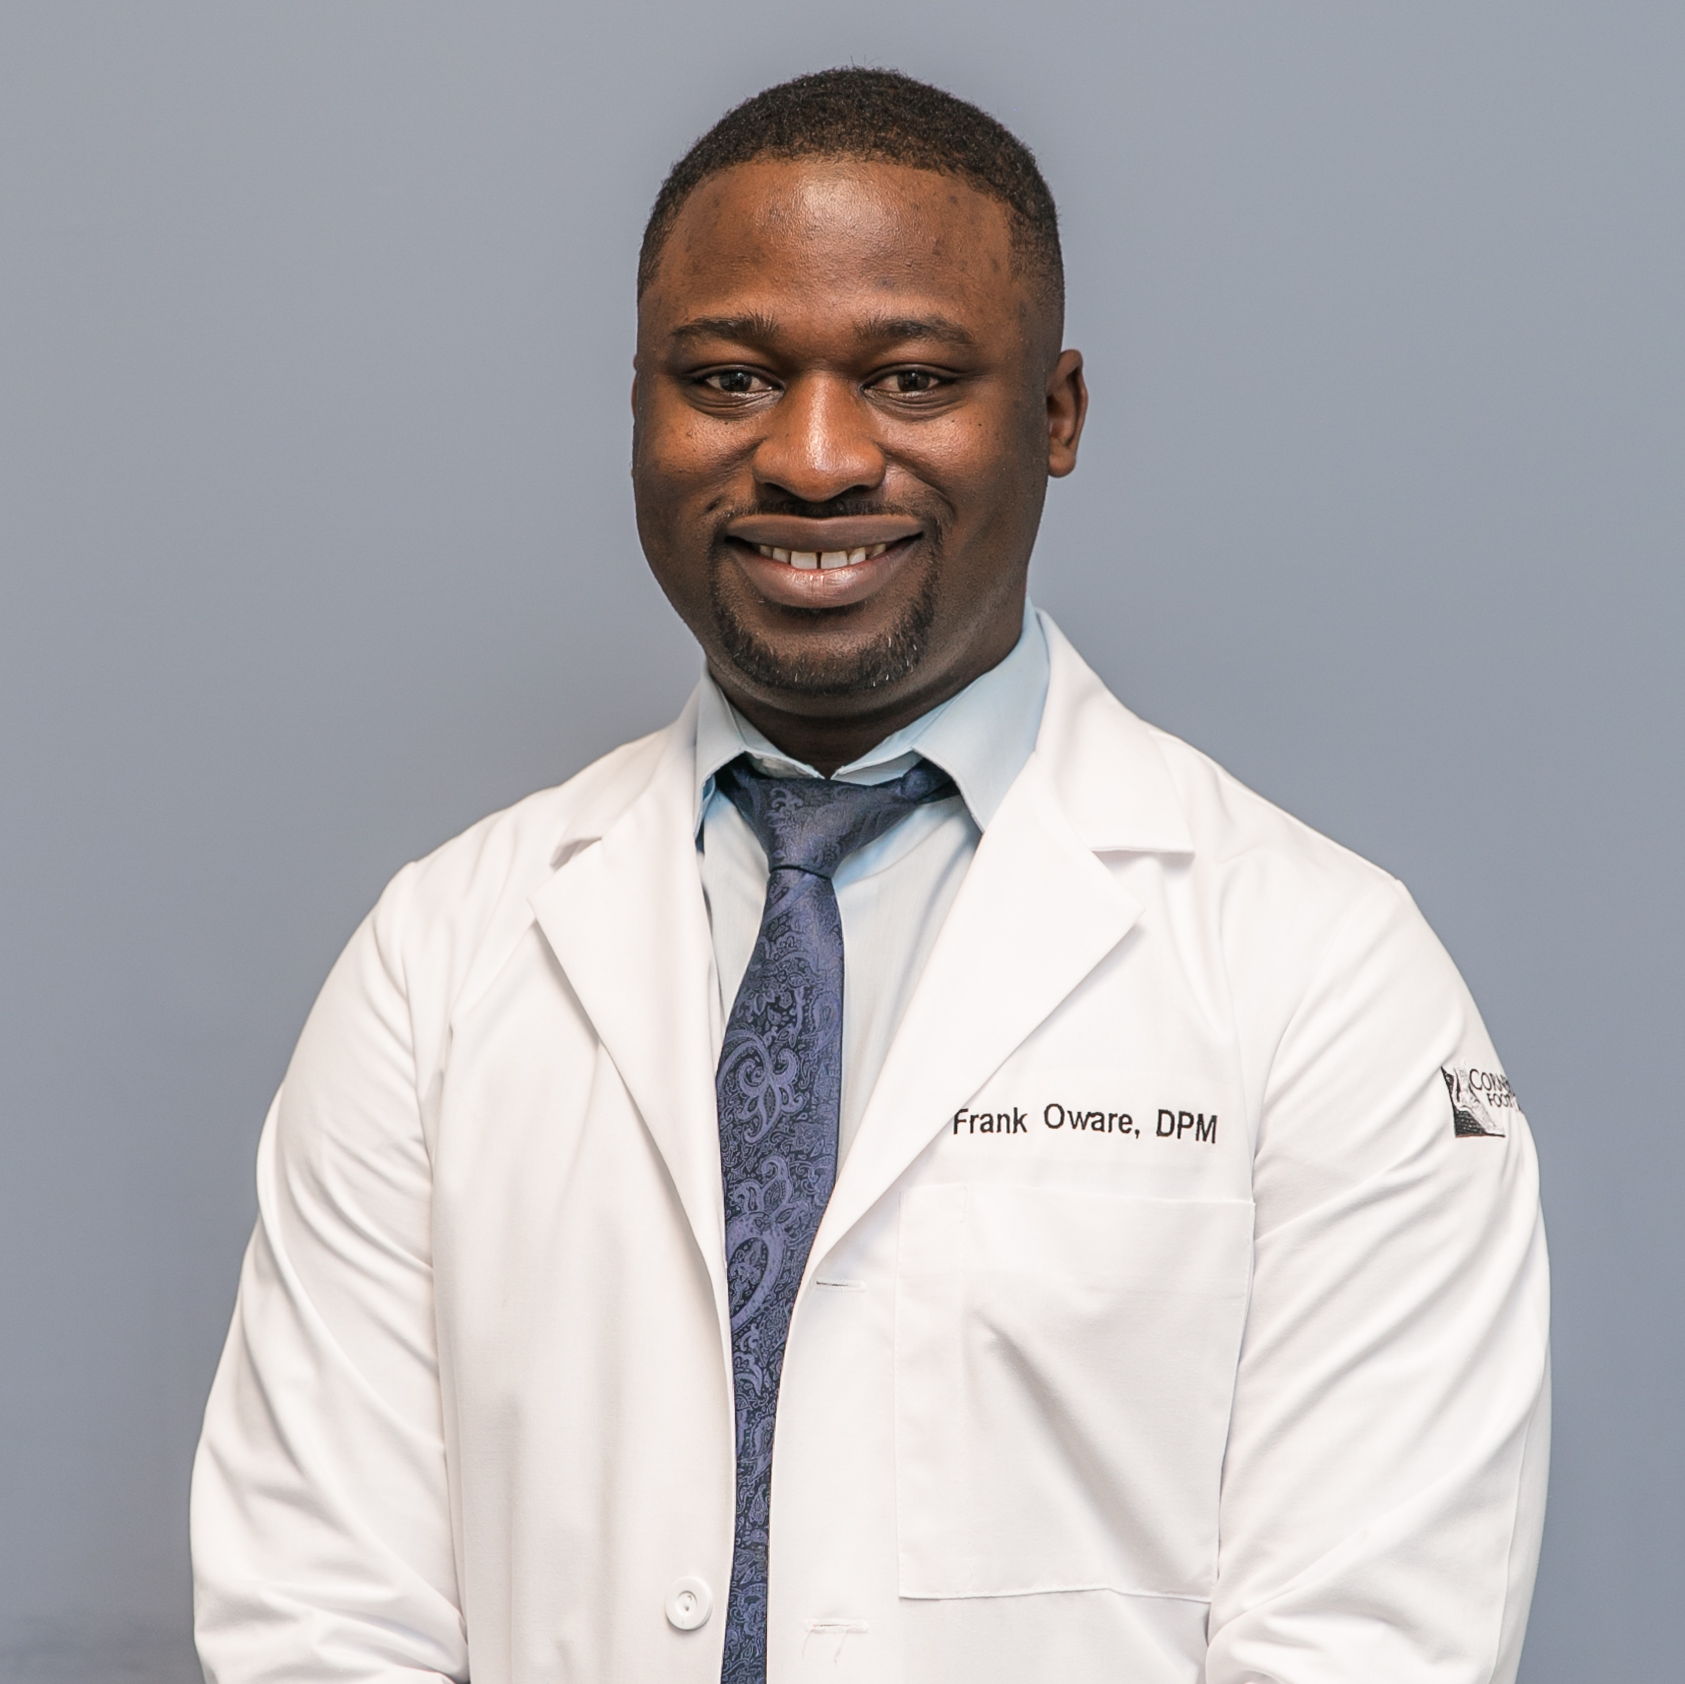 Dr. Frank Oware DPM, Podiatrist (Foot and Ankle Specialist)